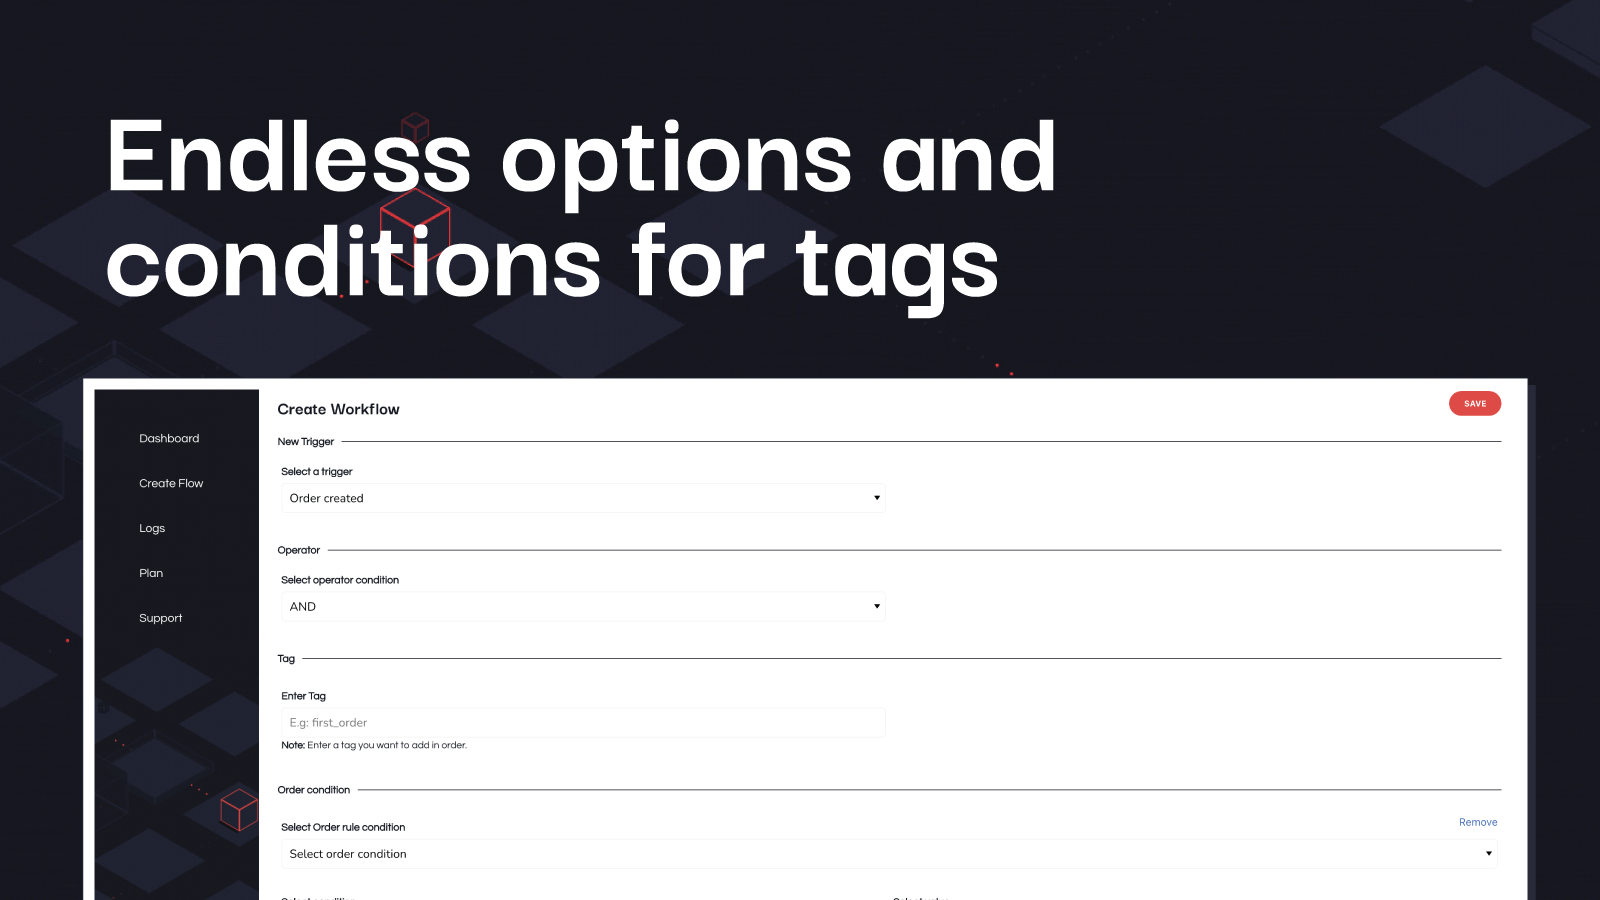 Endless options for conditions and tags